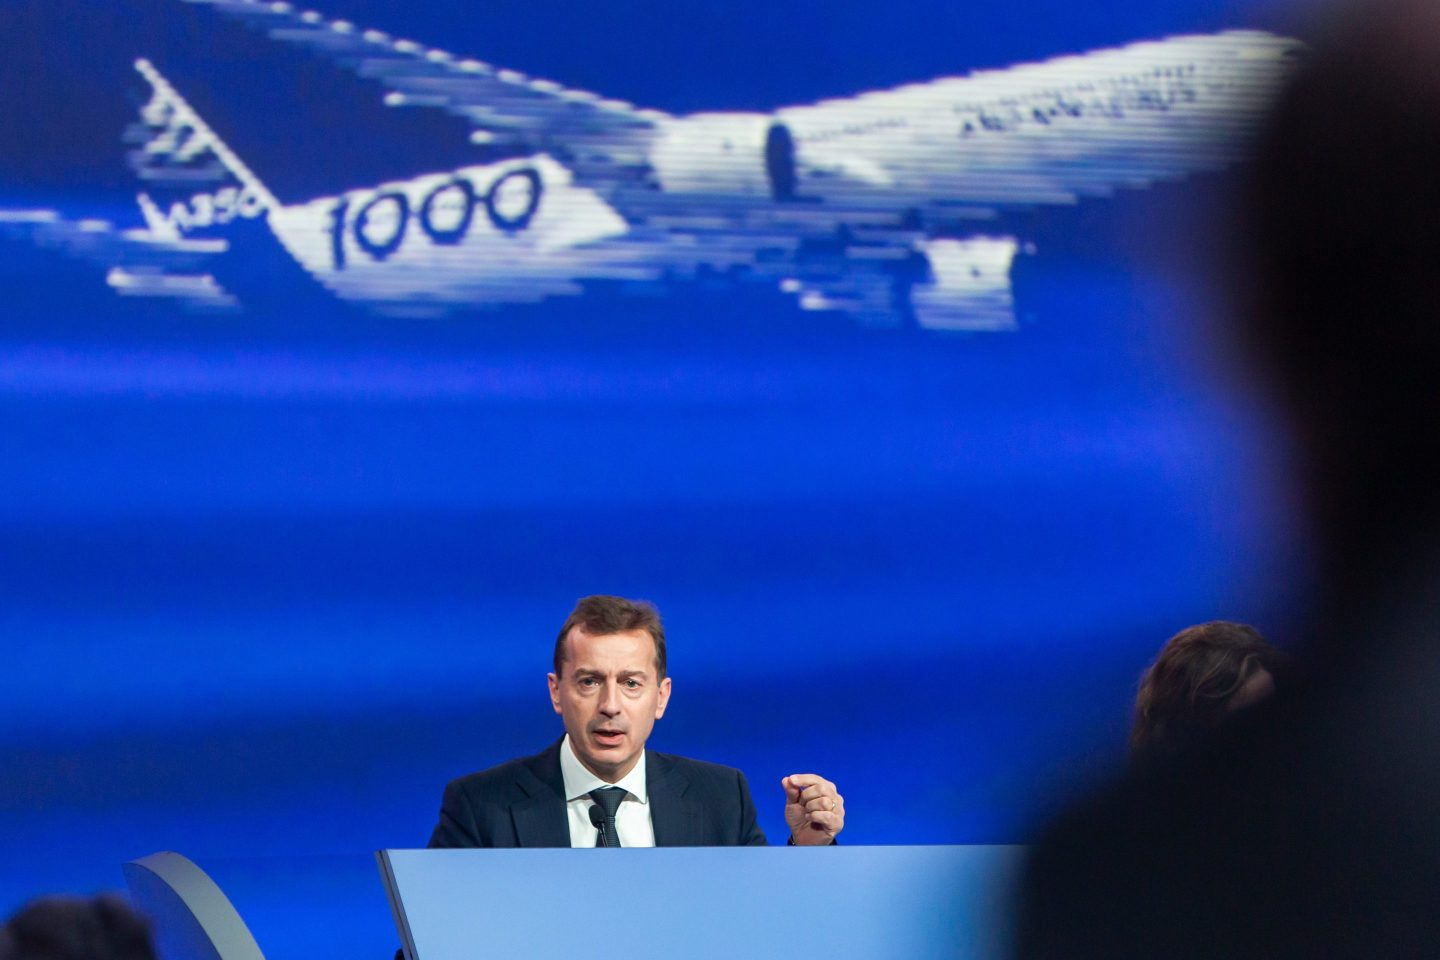 Guillaume Faury, chief executive officer of Airbus SE, during a full year earnings news conference in Toulouse, France, on Thursday, Feb. 15, 2024. Airbus said it plans to hand over about 800 aircraft this year, pushing output of its bestselling A320 family of single-aisle jets at a time when arch-rival Boeing Co. is stuck in crisis mode after a near-disastrous accident early last month. Photographer: Matthieu Rondel/Bloomberg via Getty Images